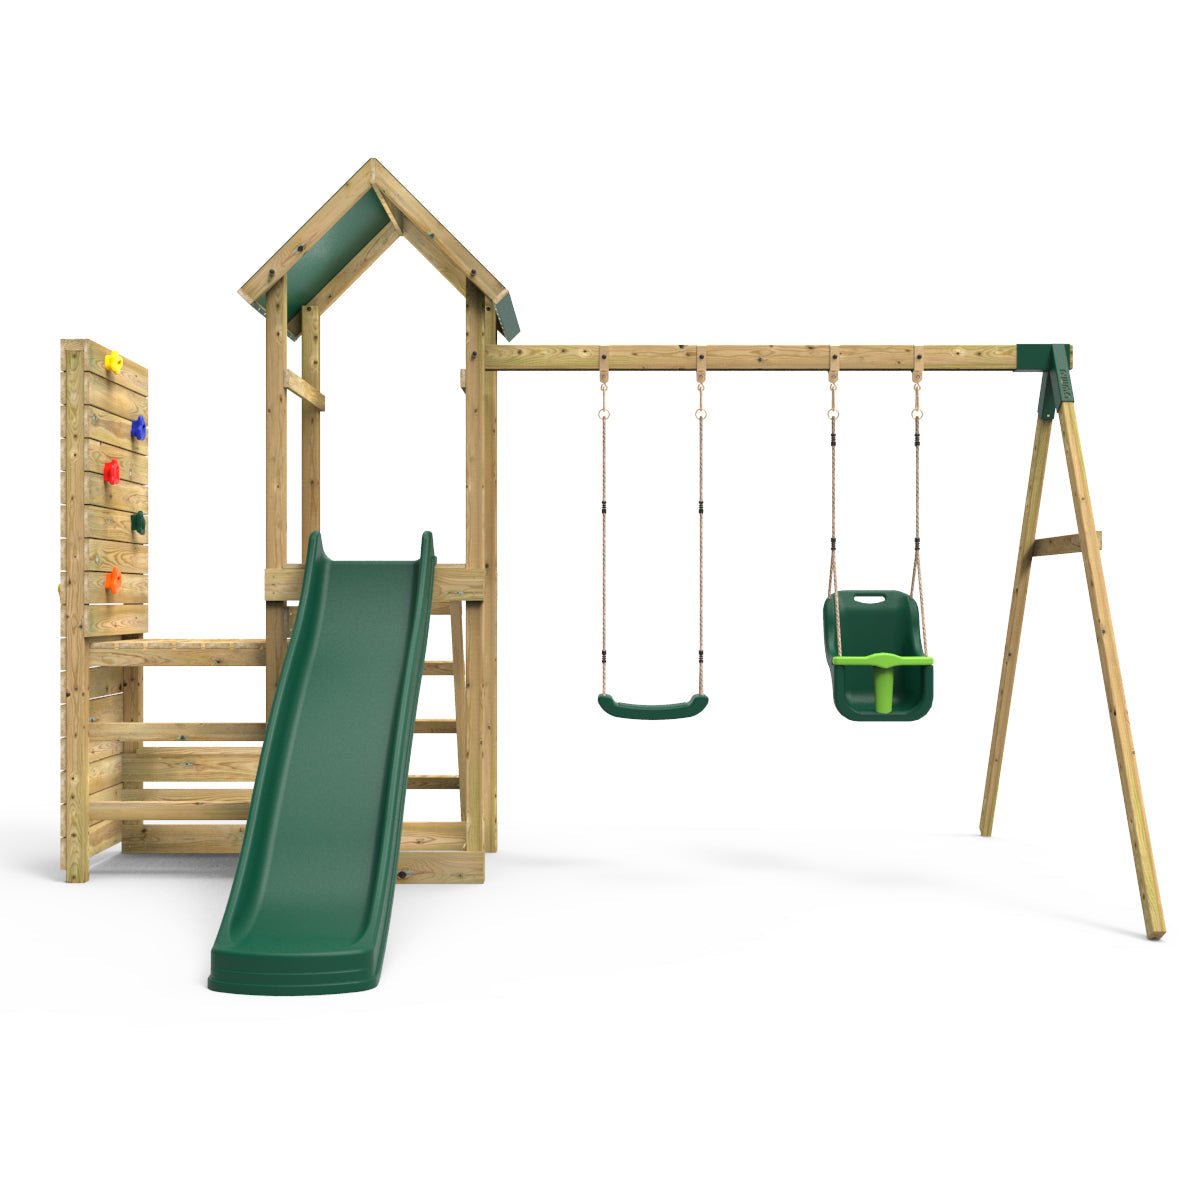 Rebo Wooden Climbing Frame with Vertical Rock Wall, Swing Set and Slide - Rainier+